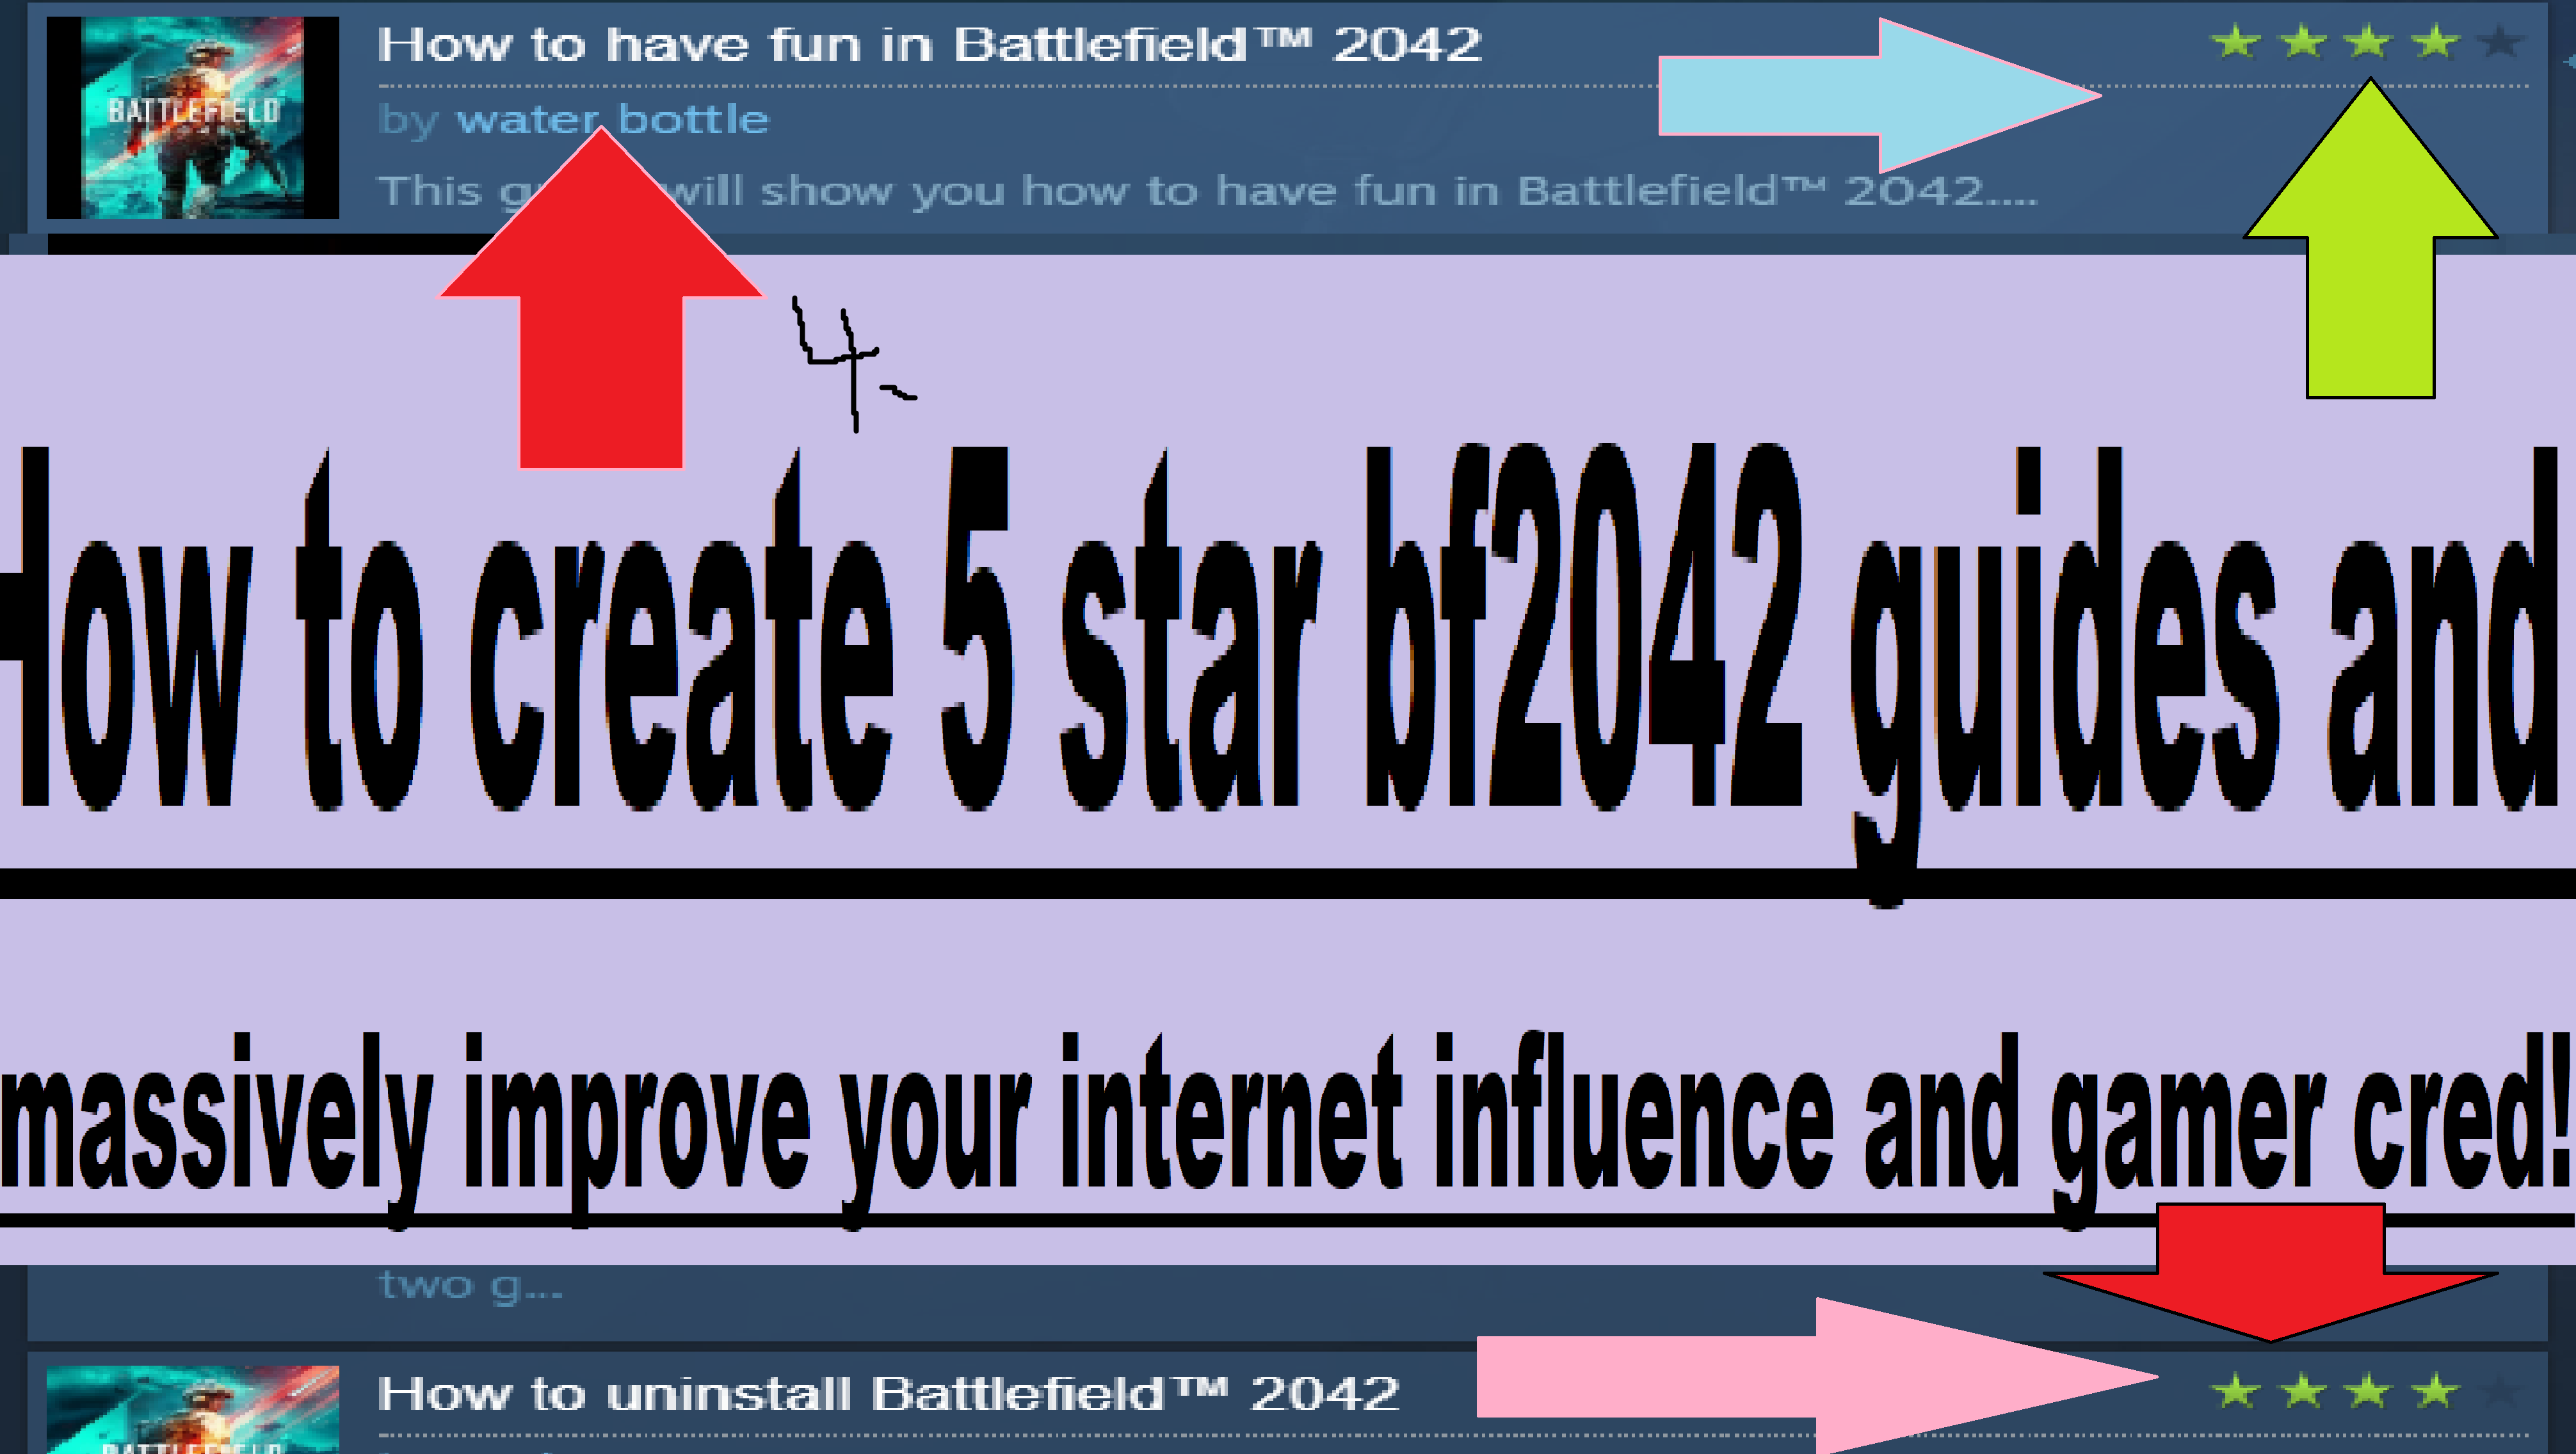 How to create a 5 star guide to Battlefield 2042.... image 1